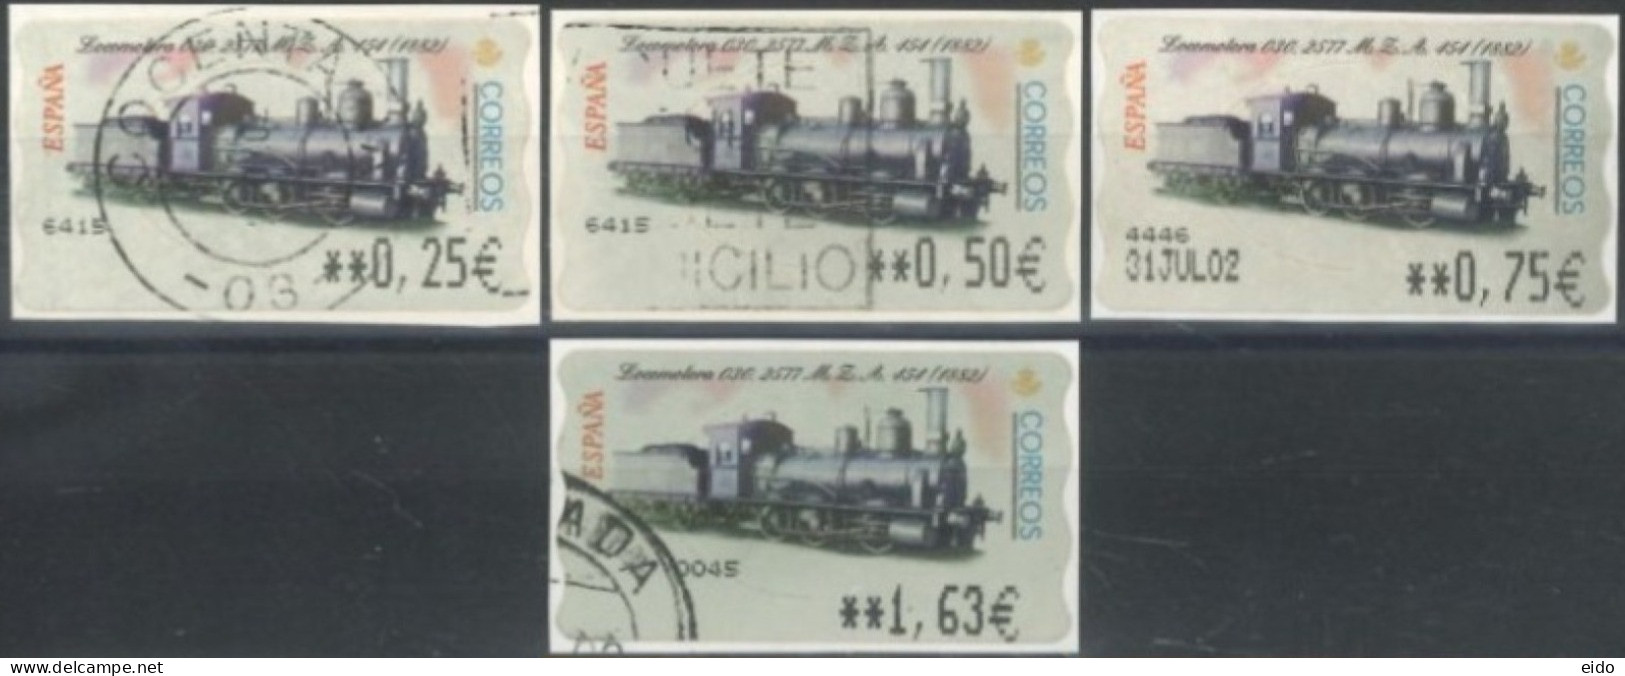 SPAIN- 2002, LOCOMOTIVES STAMPS LABELS SET OF 4, DIFFERENT VALUES, USED. - Usati